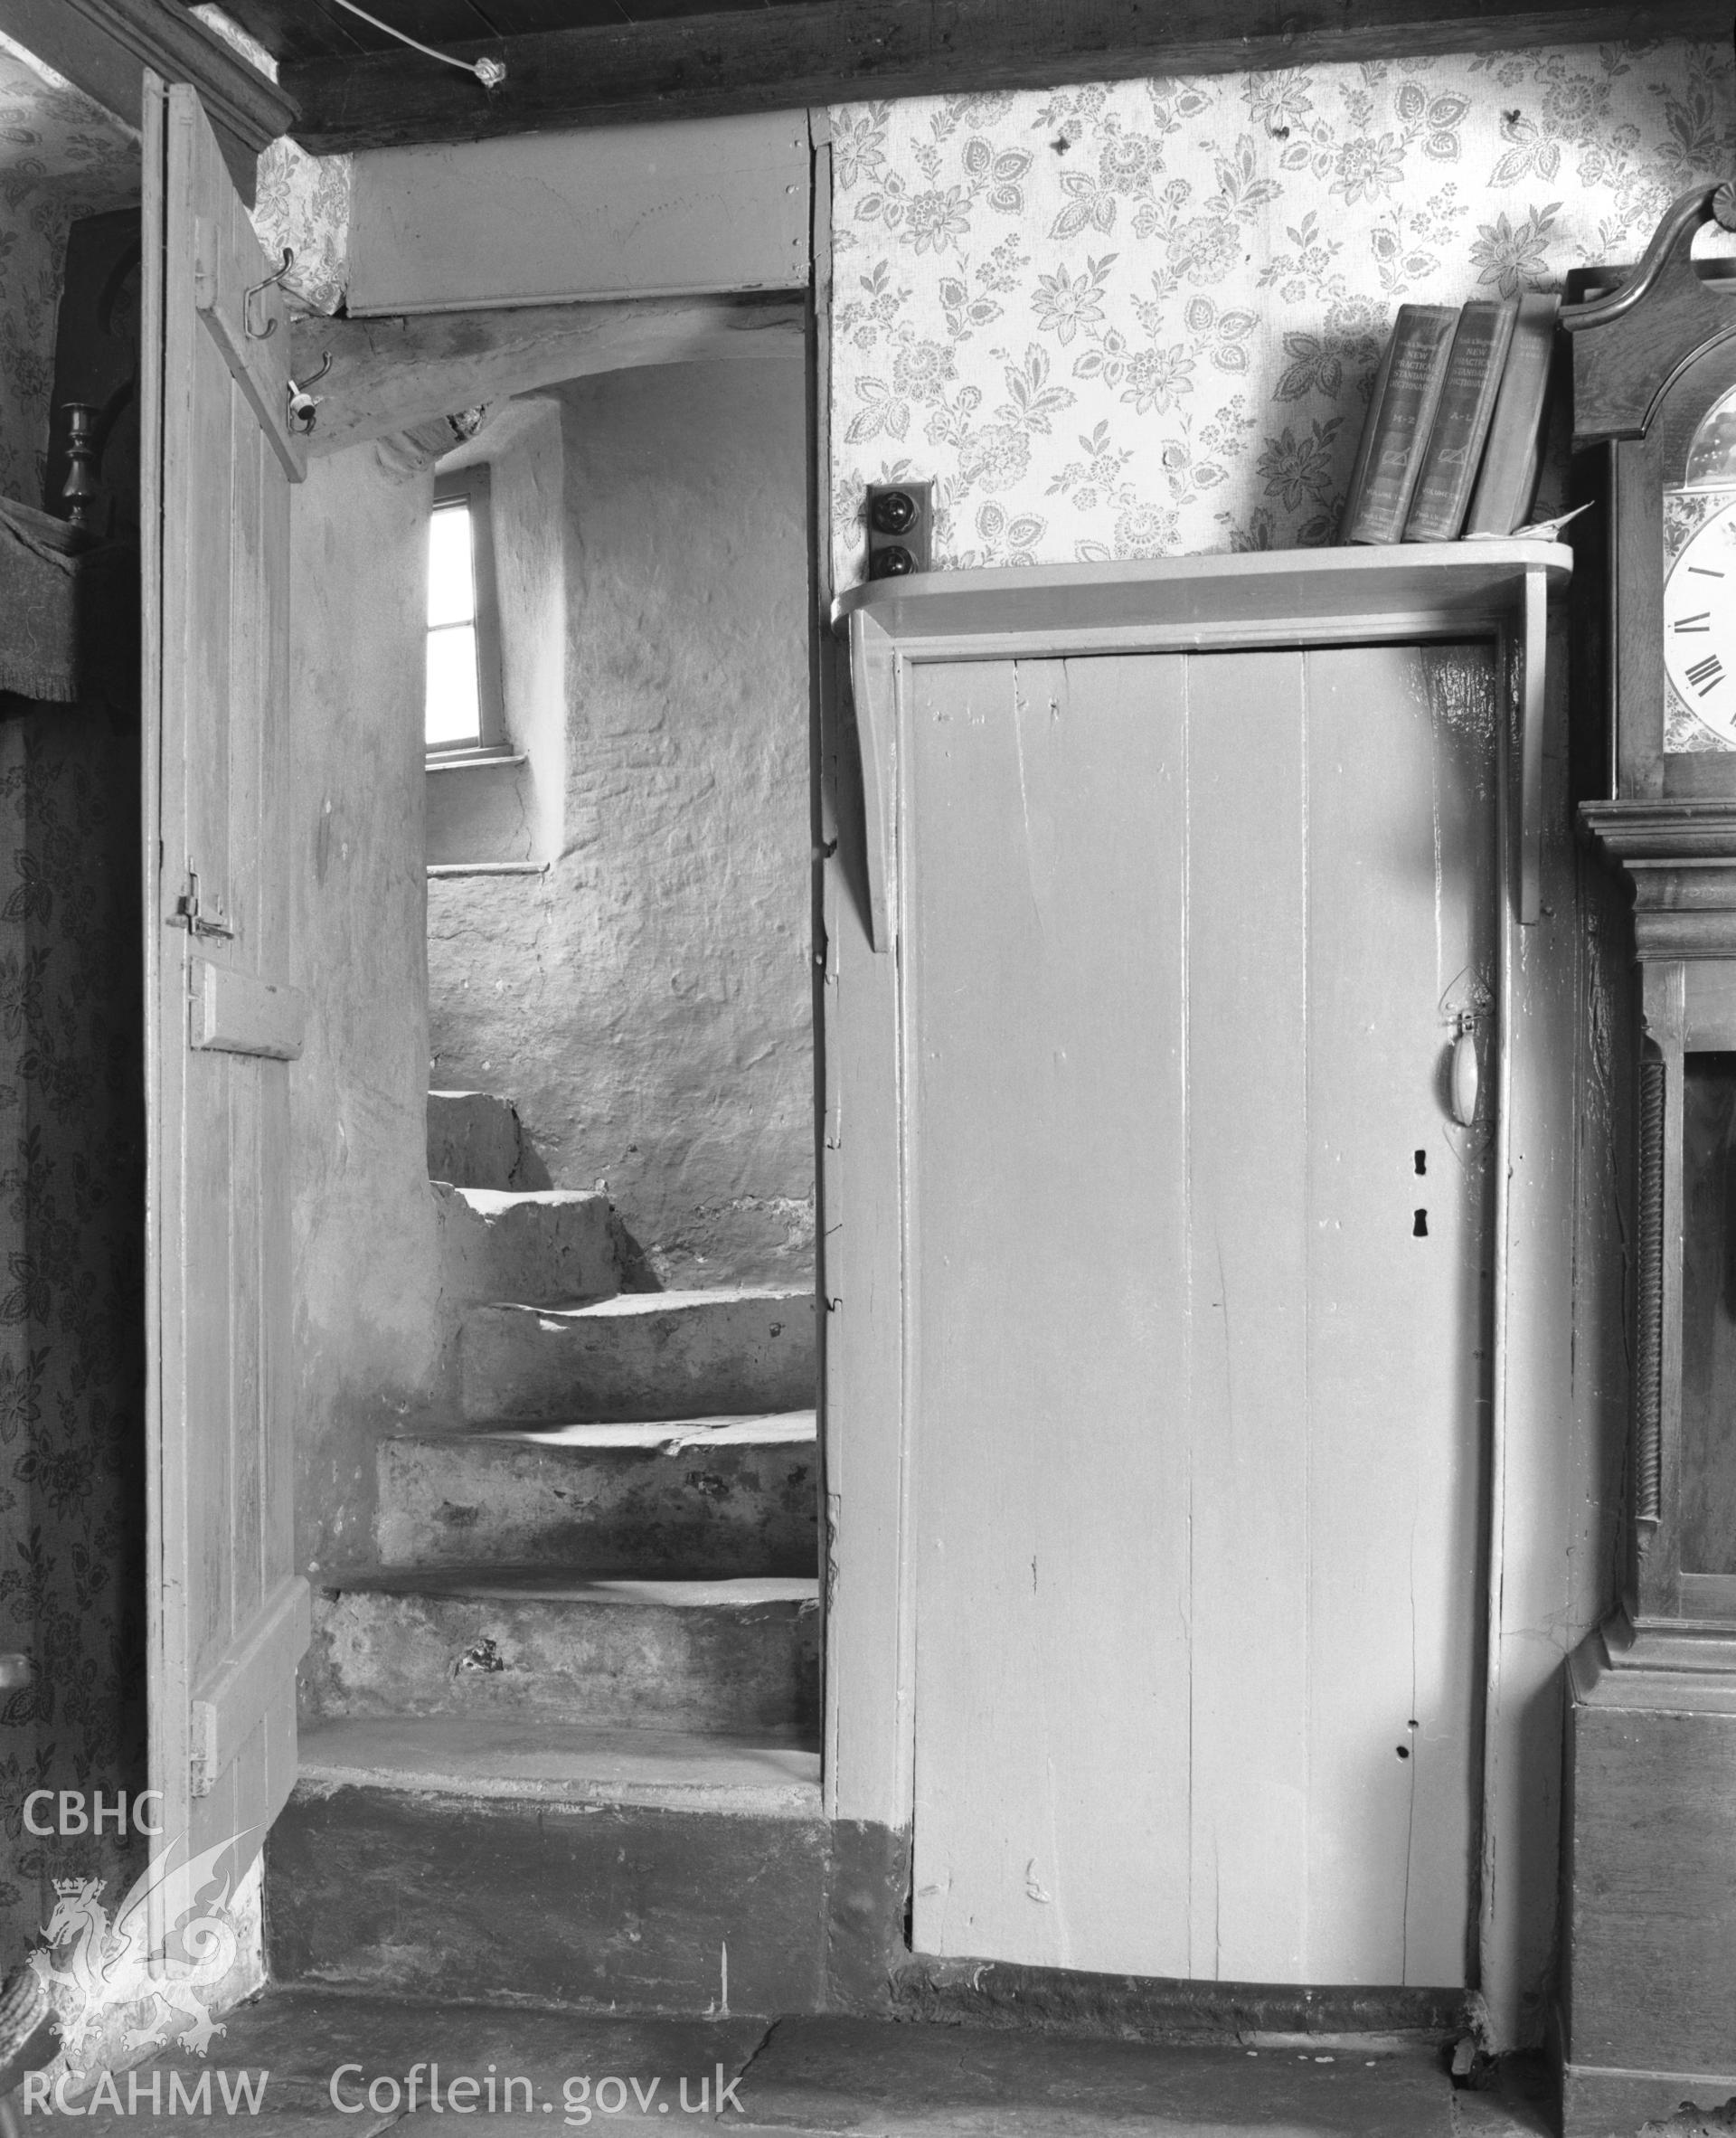 Interior view showing steps and cupboard.